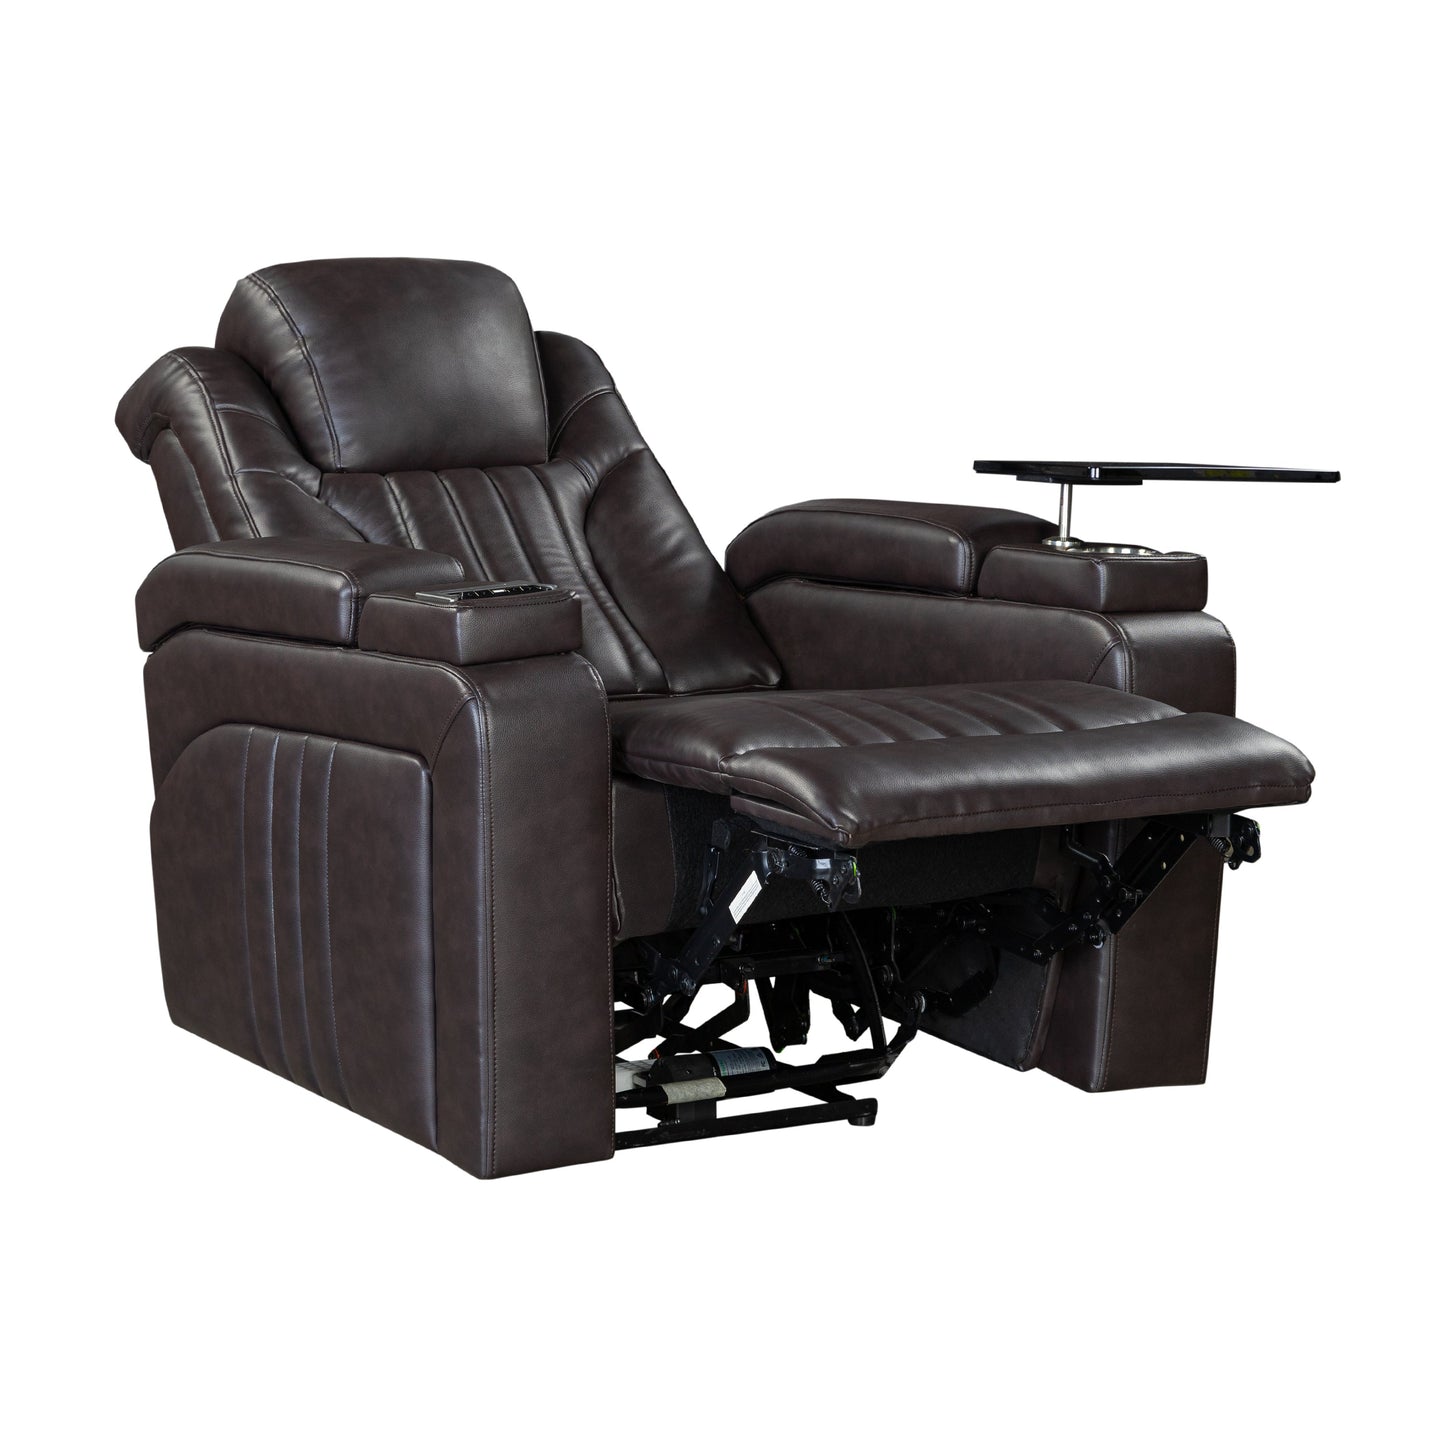 PU Leather Power Recliner Home Theater Recliner with Power Adjustable Headrest, Wireless Charging Device, USB Port, Storage Arms, Cup Holder and Swivel Tray Table for Living Room, Brown